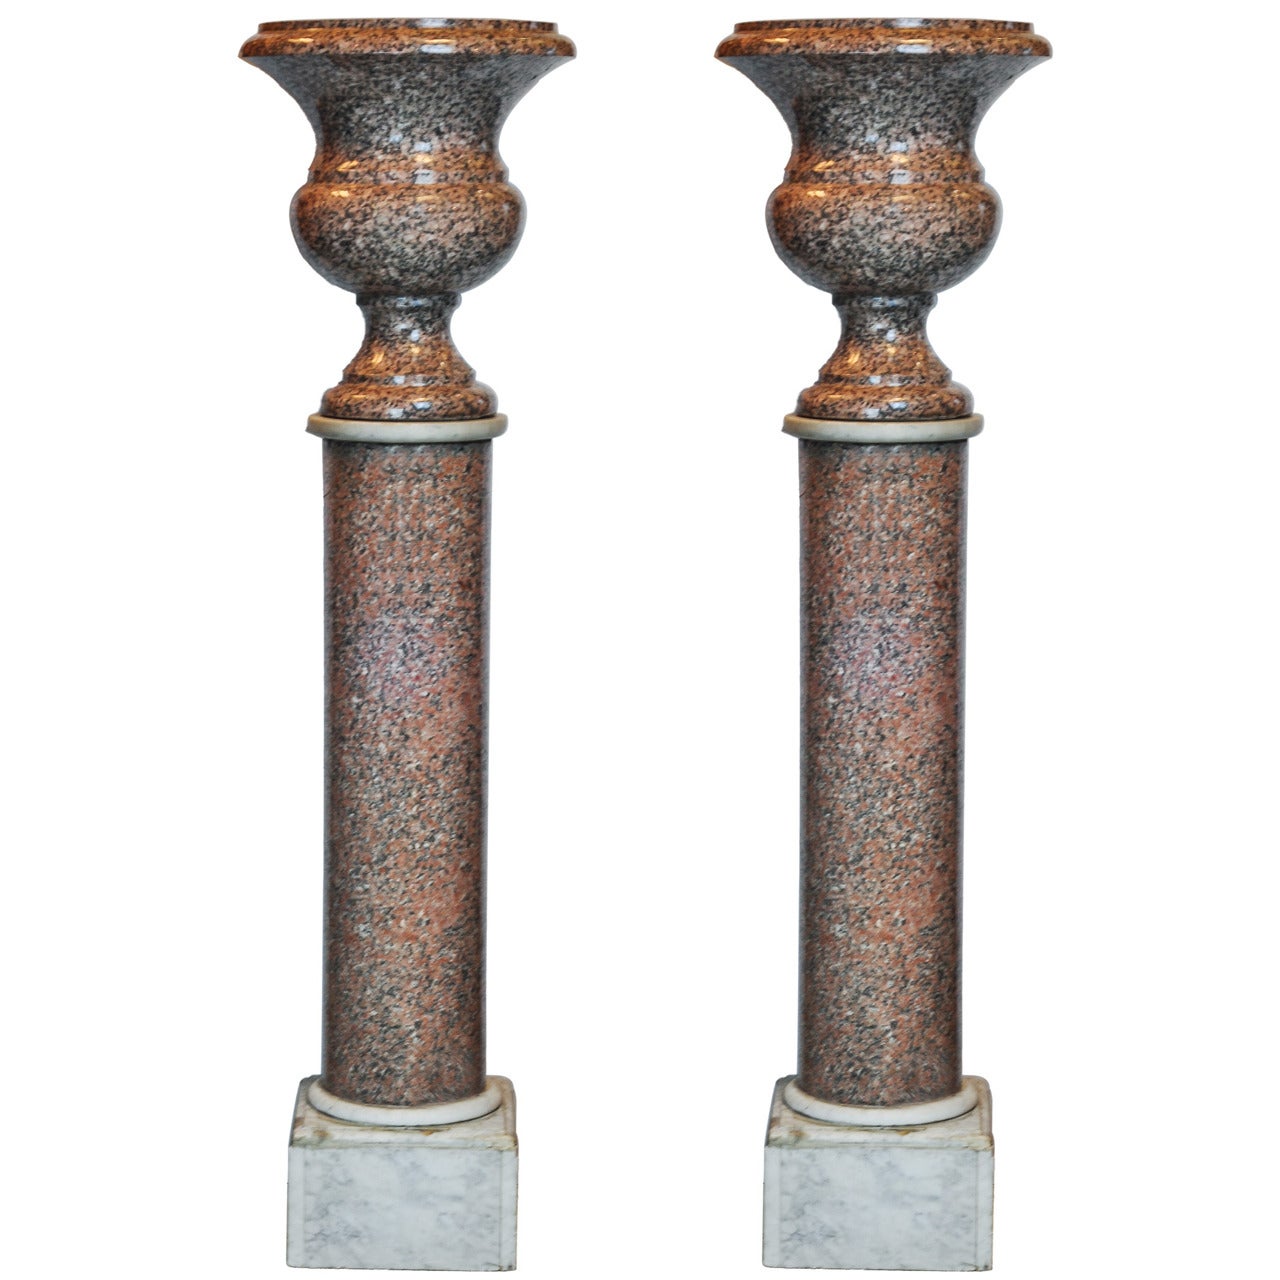 Pair of Neoclassical Campana Form Marble Urns on Pedestals